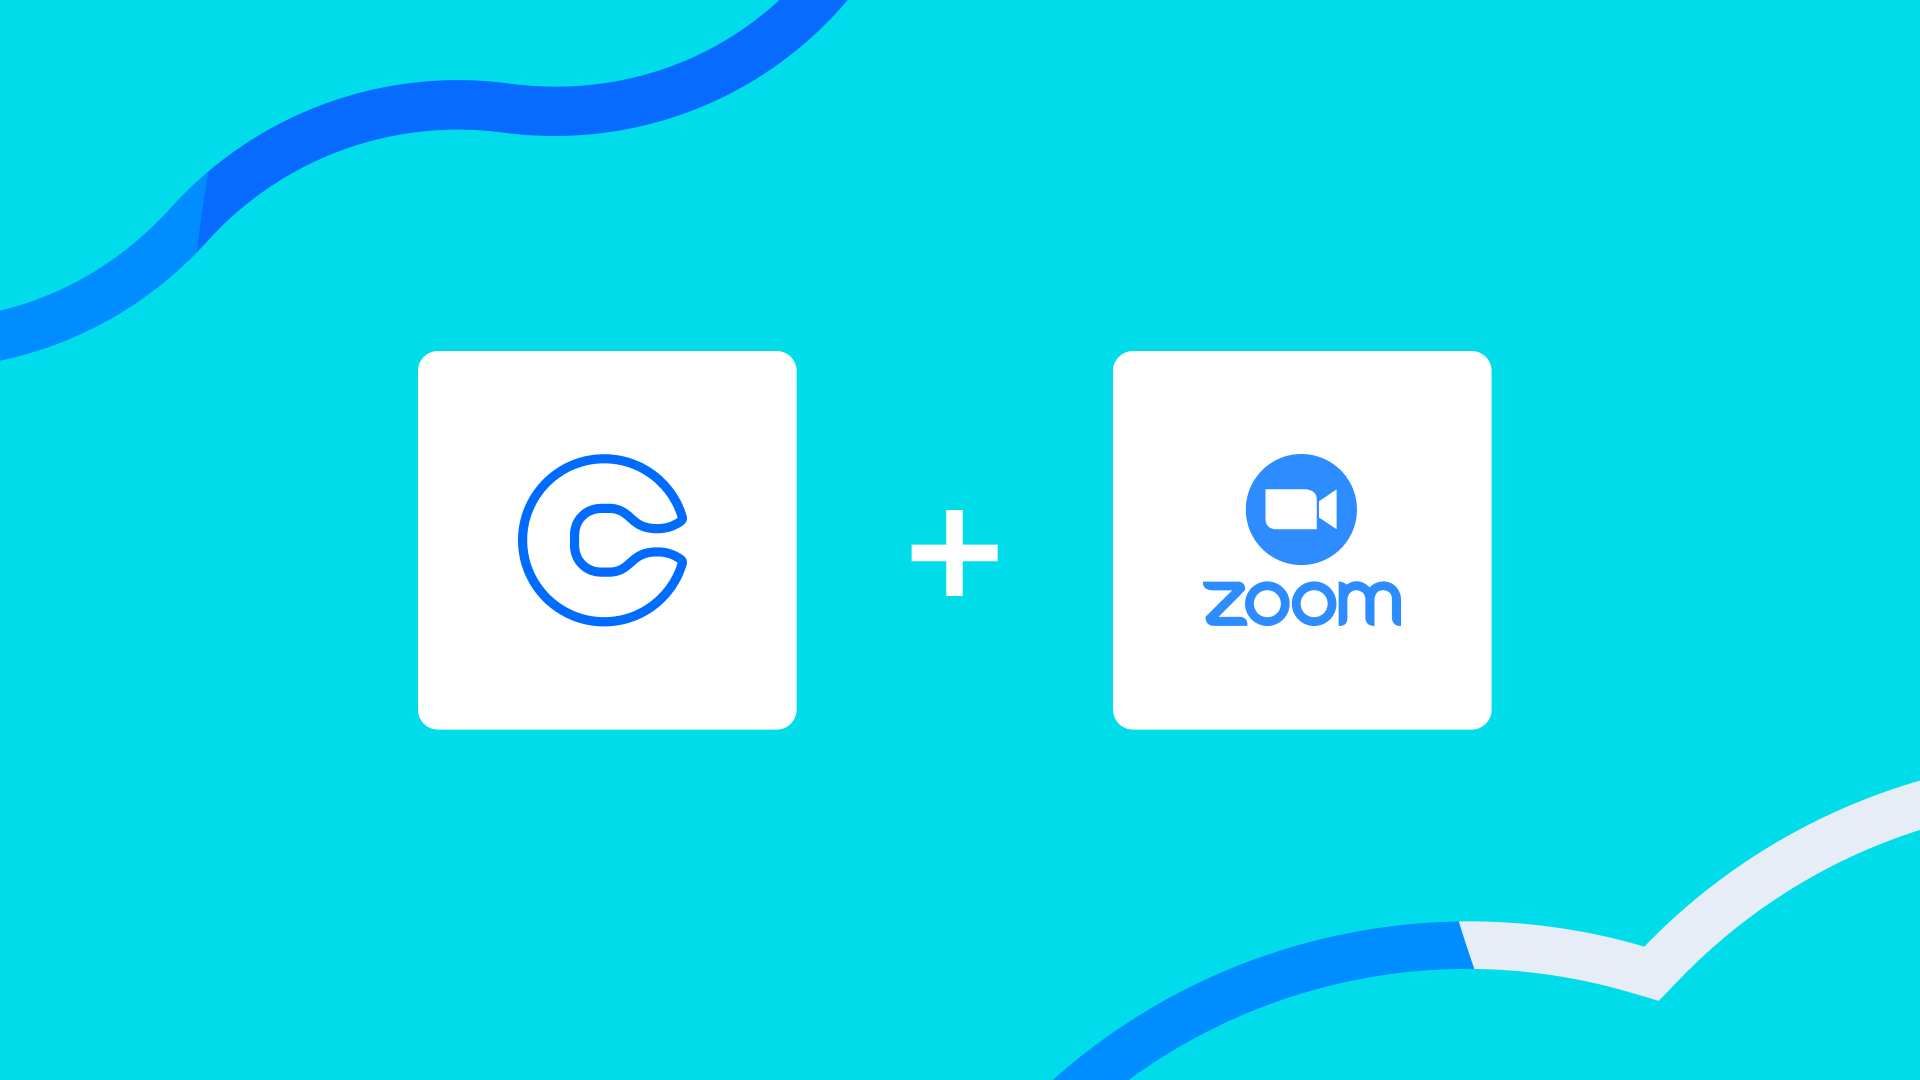 Automatically add Zoom video conference details to Calendly meetings